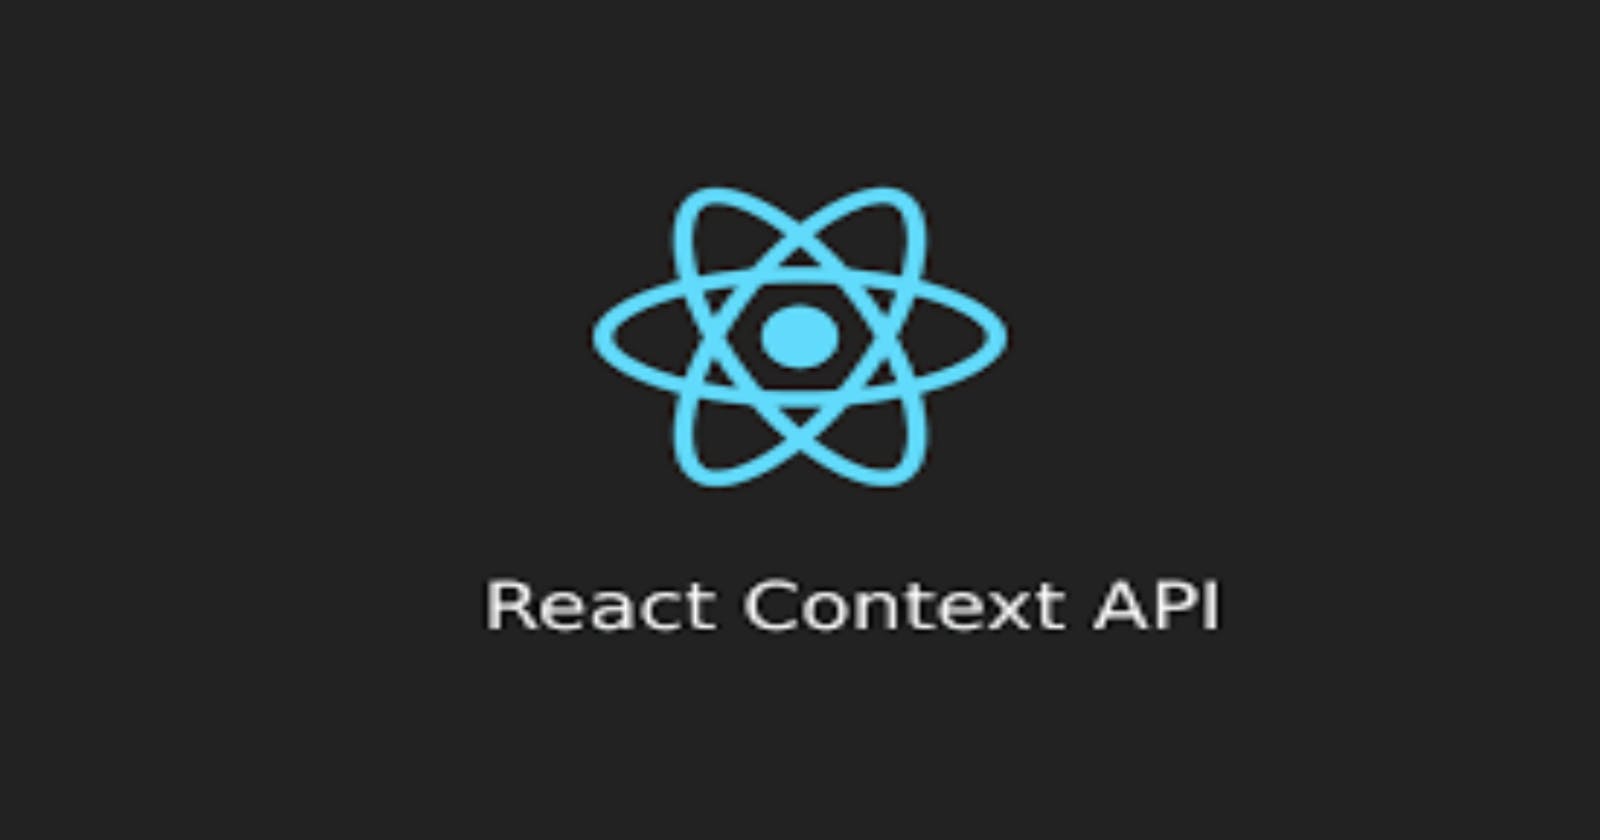 Building a Storefront using Context API in React